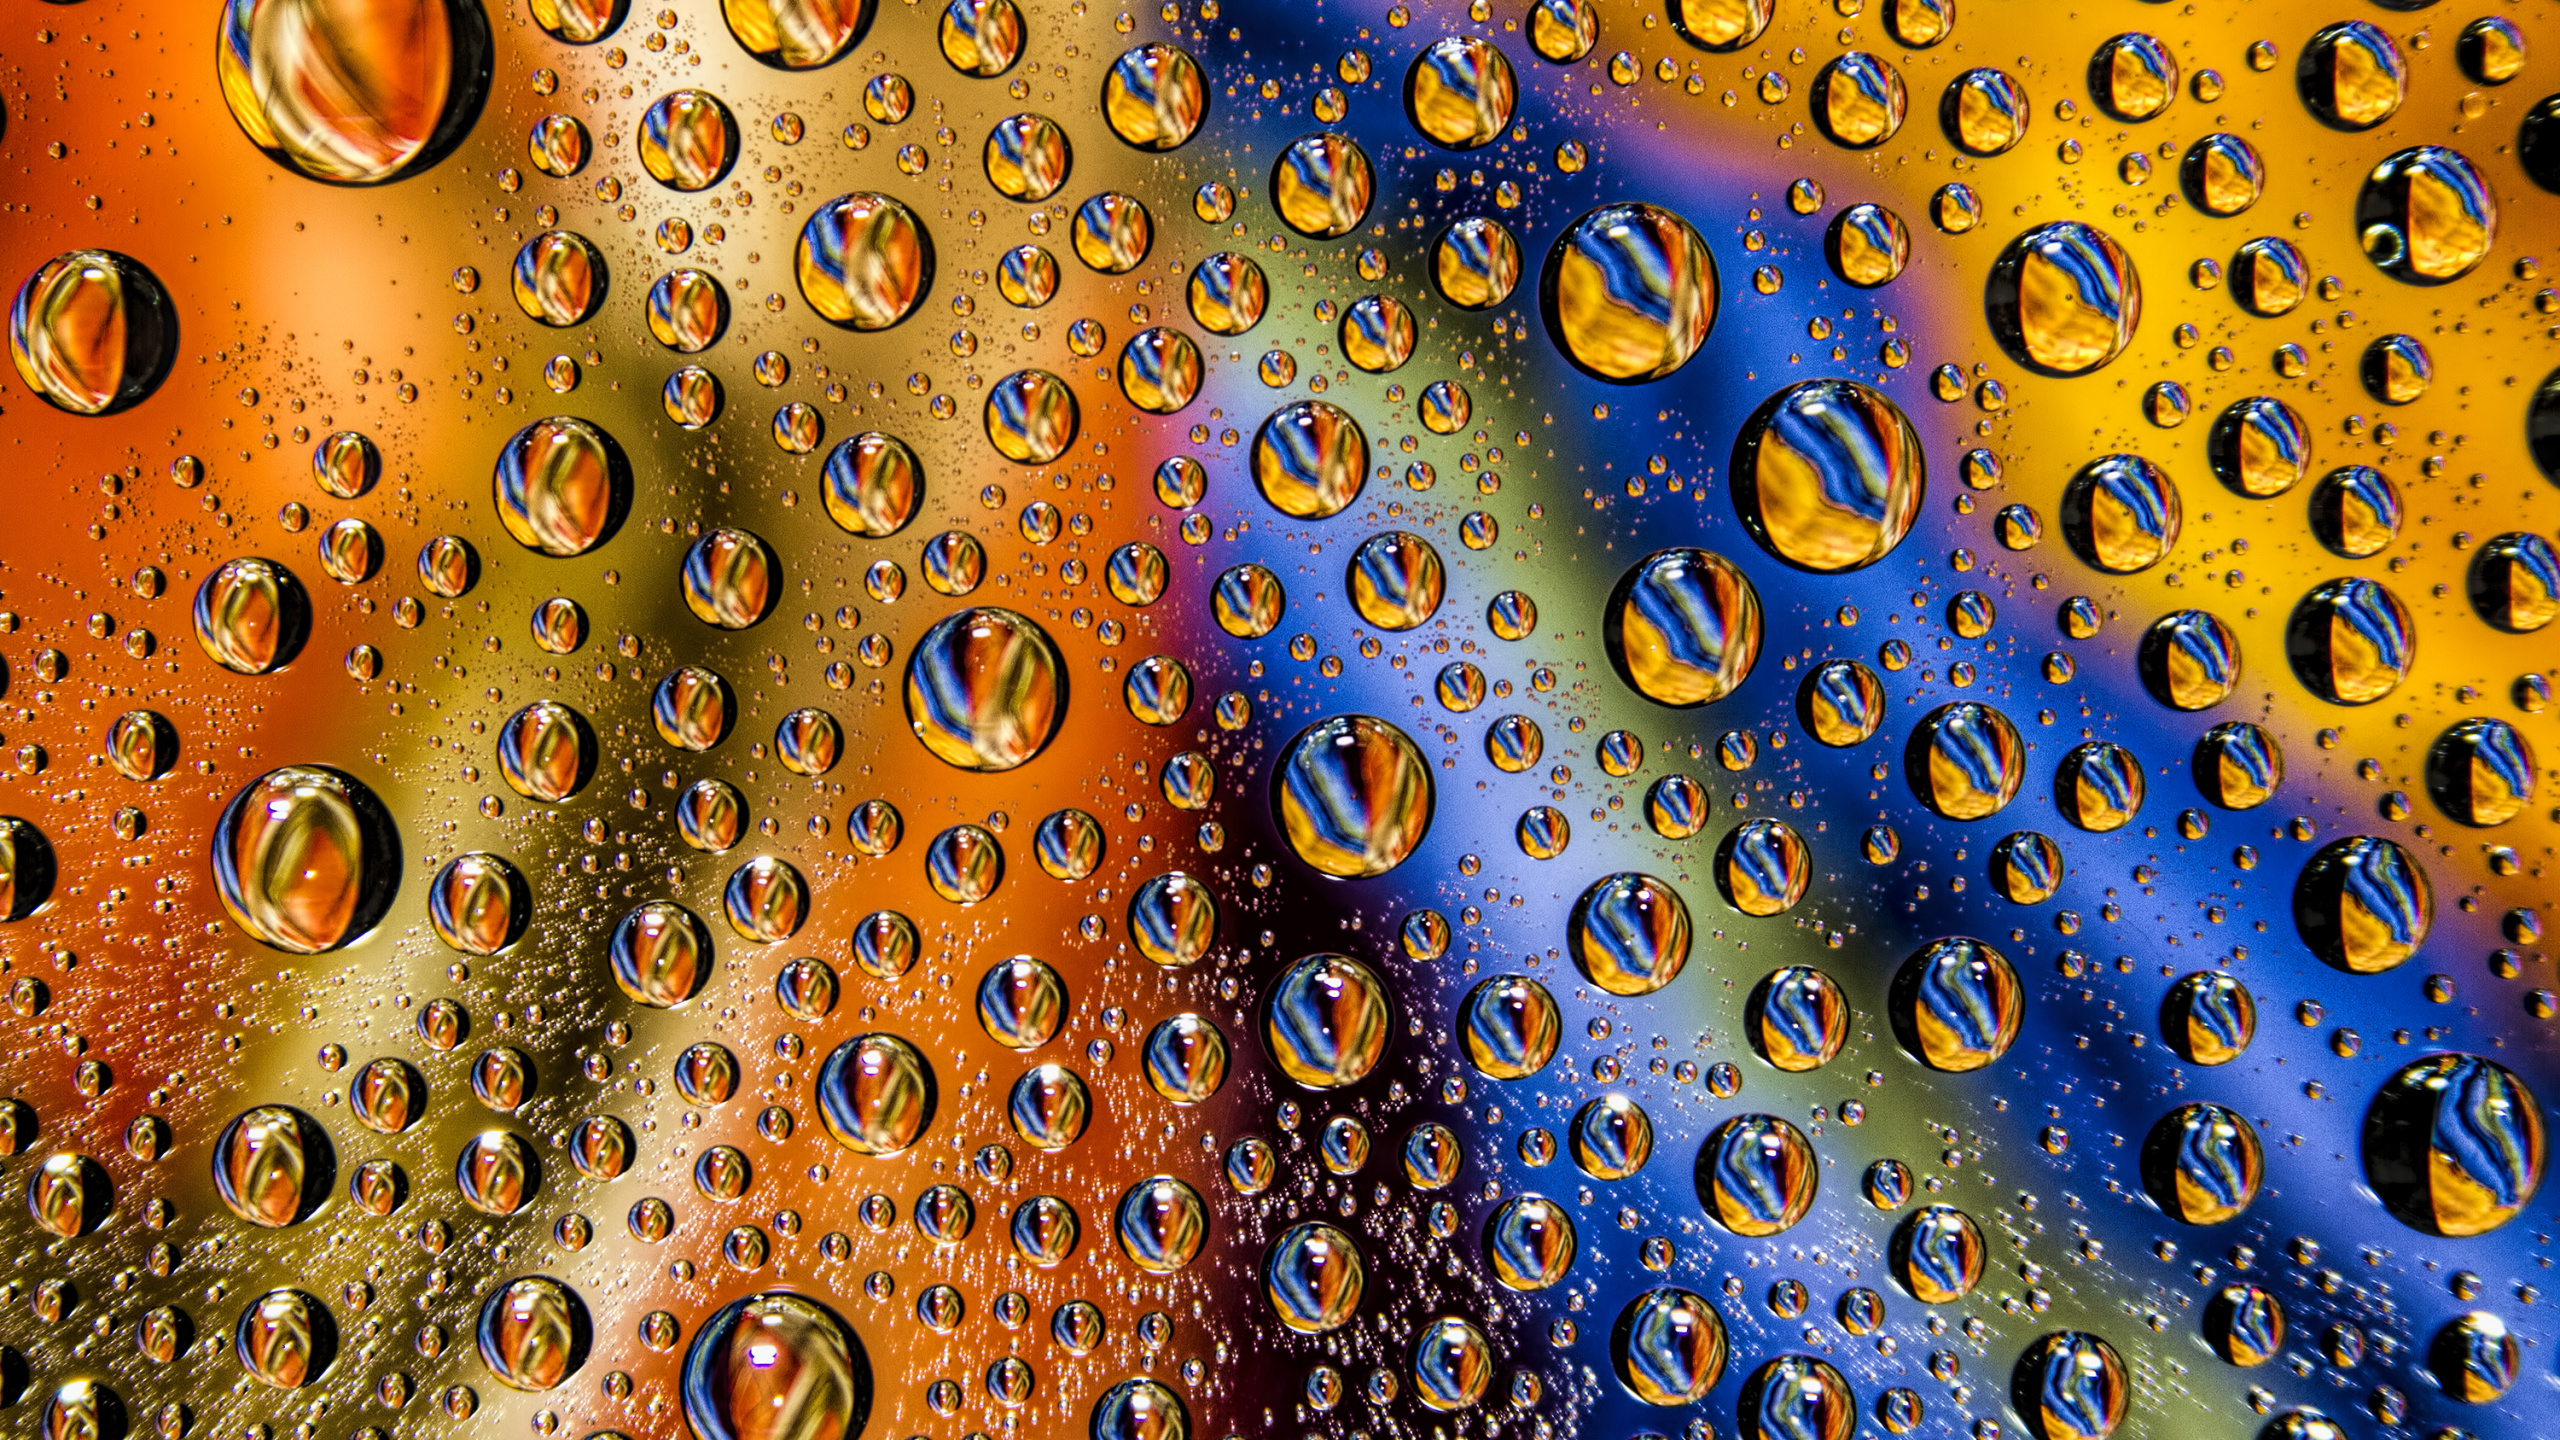 Water Droplets on Clear Glass. Wallpaper in 2560x1440 Resolution